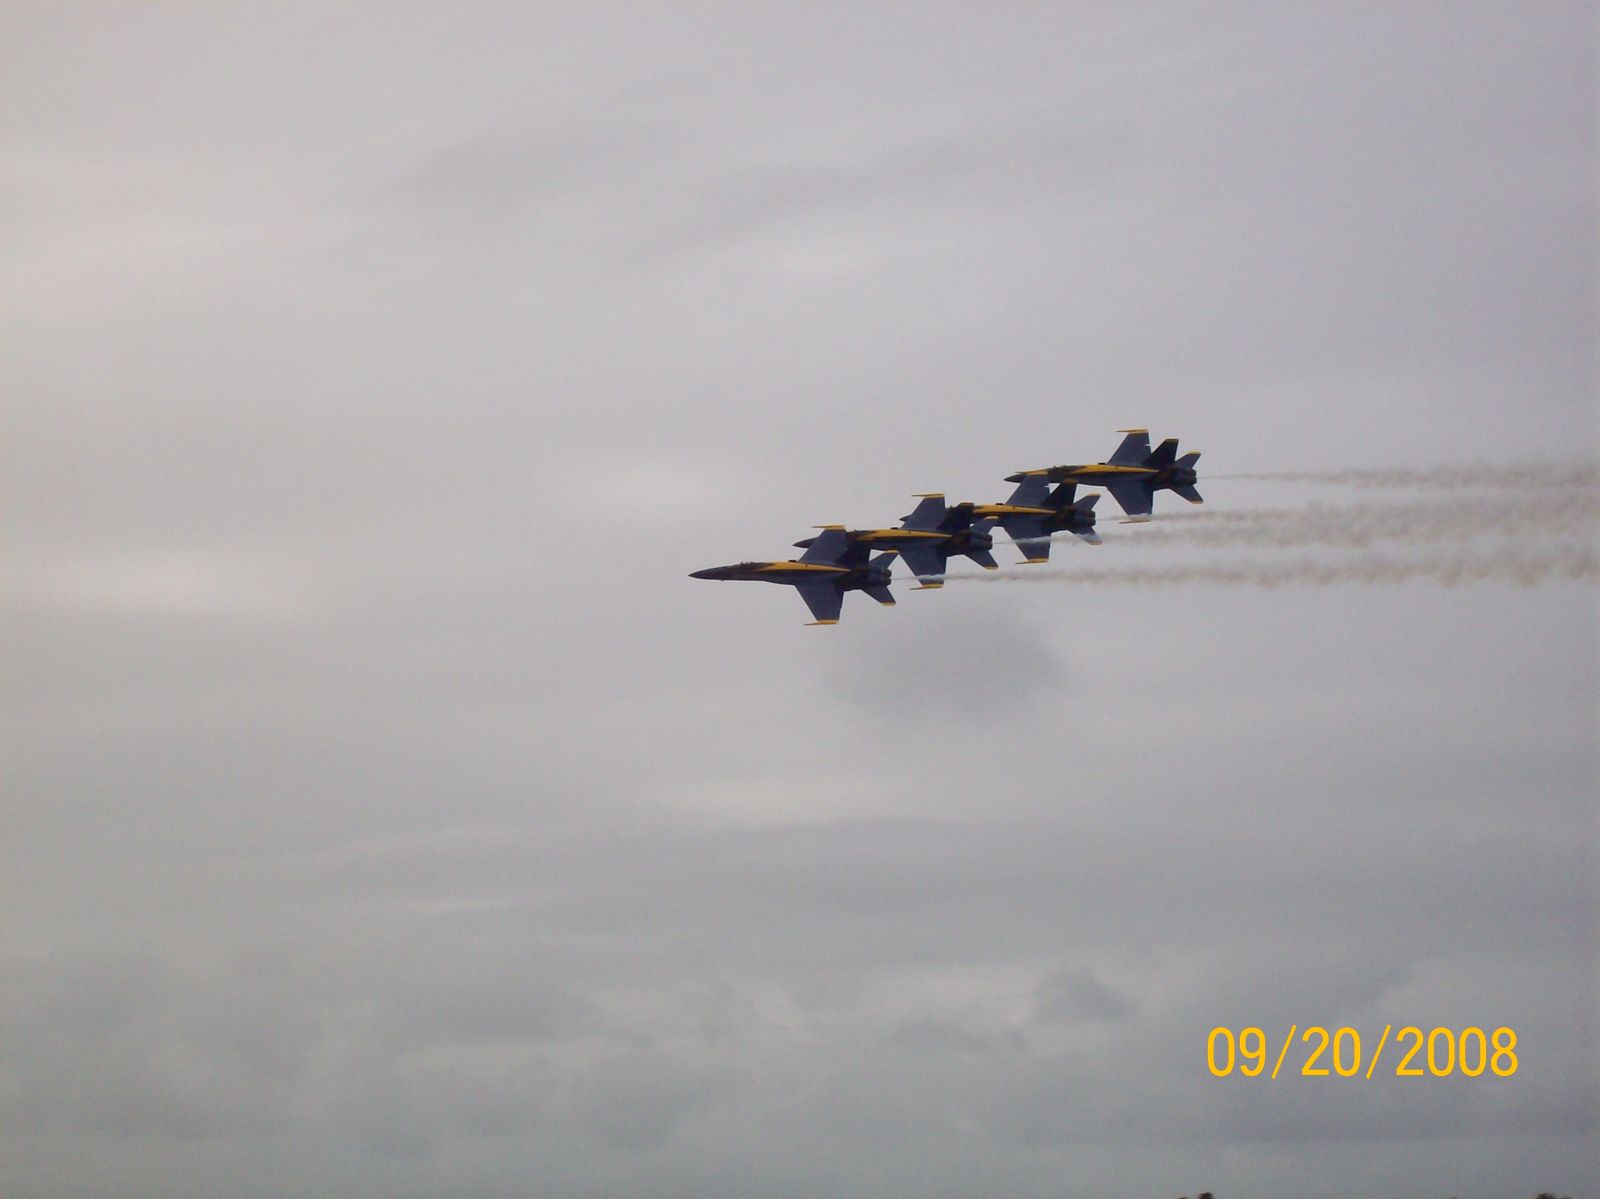 The Blue Angels at Oceana NAS